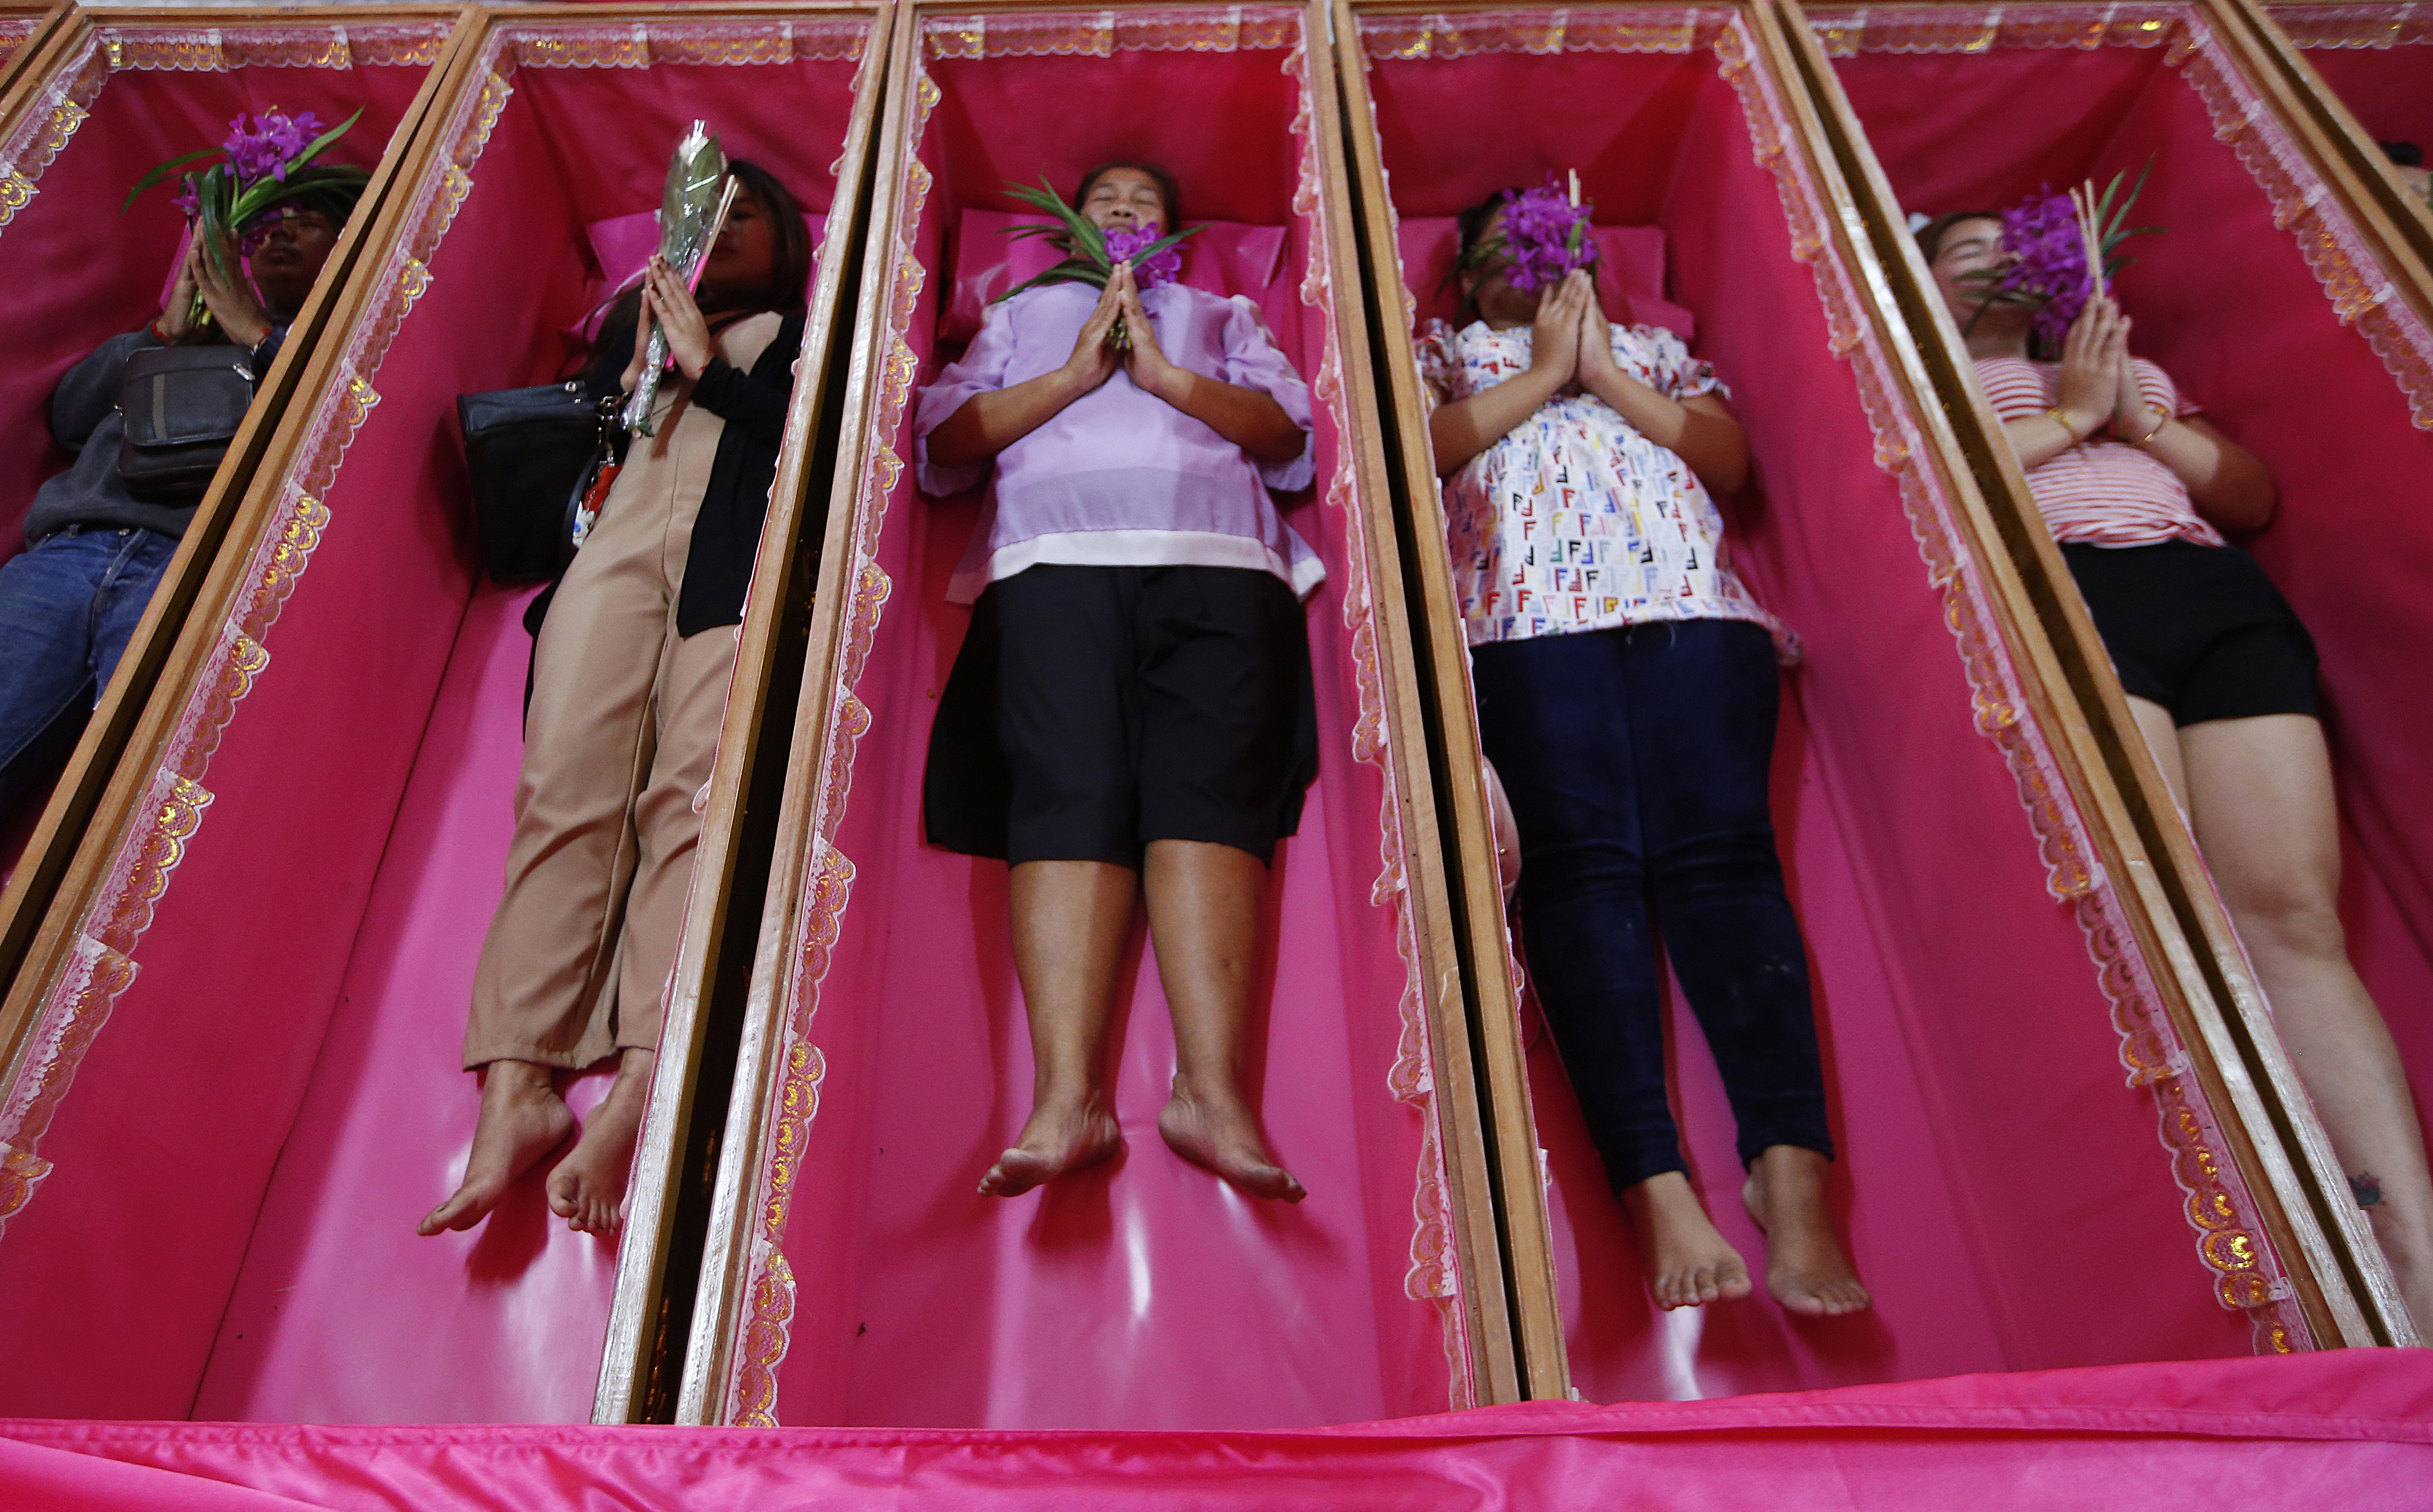 Worshippers pray as they take turns lying in coffins during a ceremony at the Takien temple in suburban Bangkok